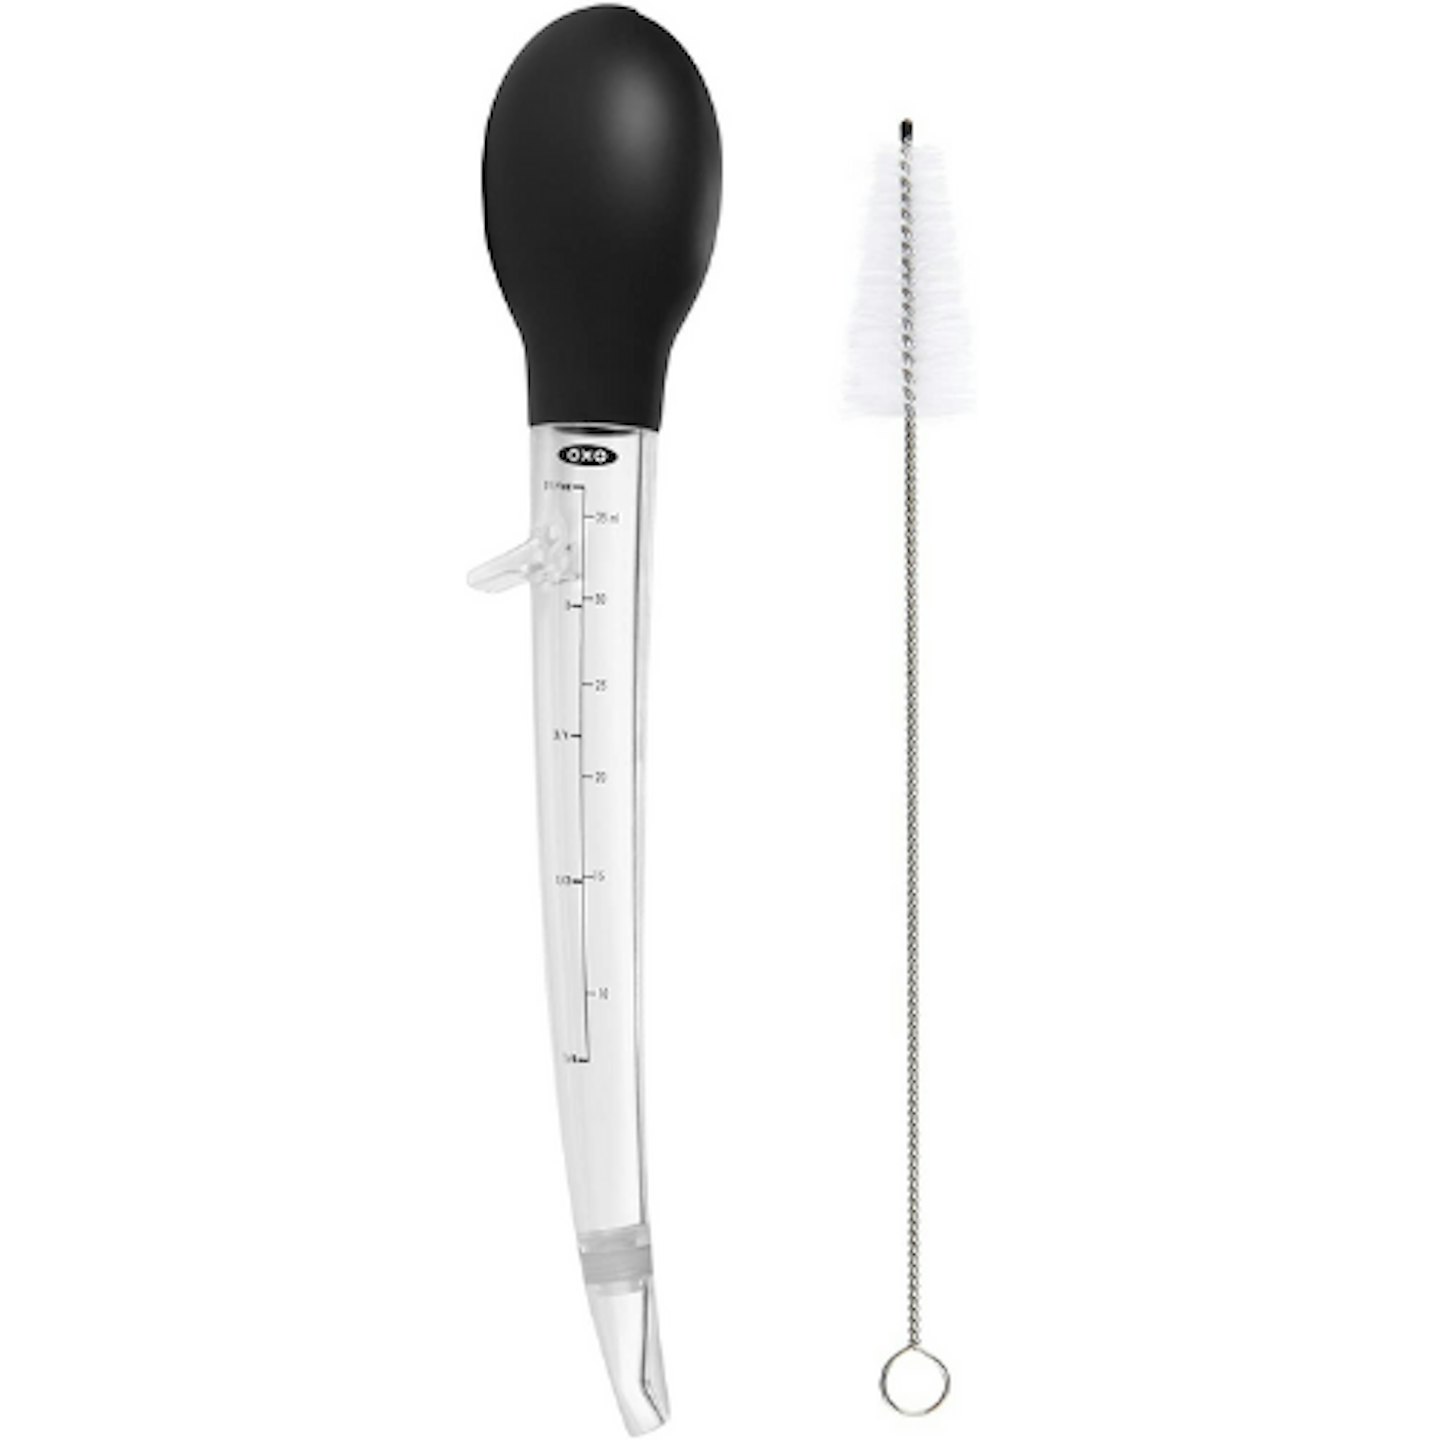 Turkey Baster: OXO Good Grips Angled Baster with Cleaning Brush